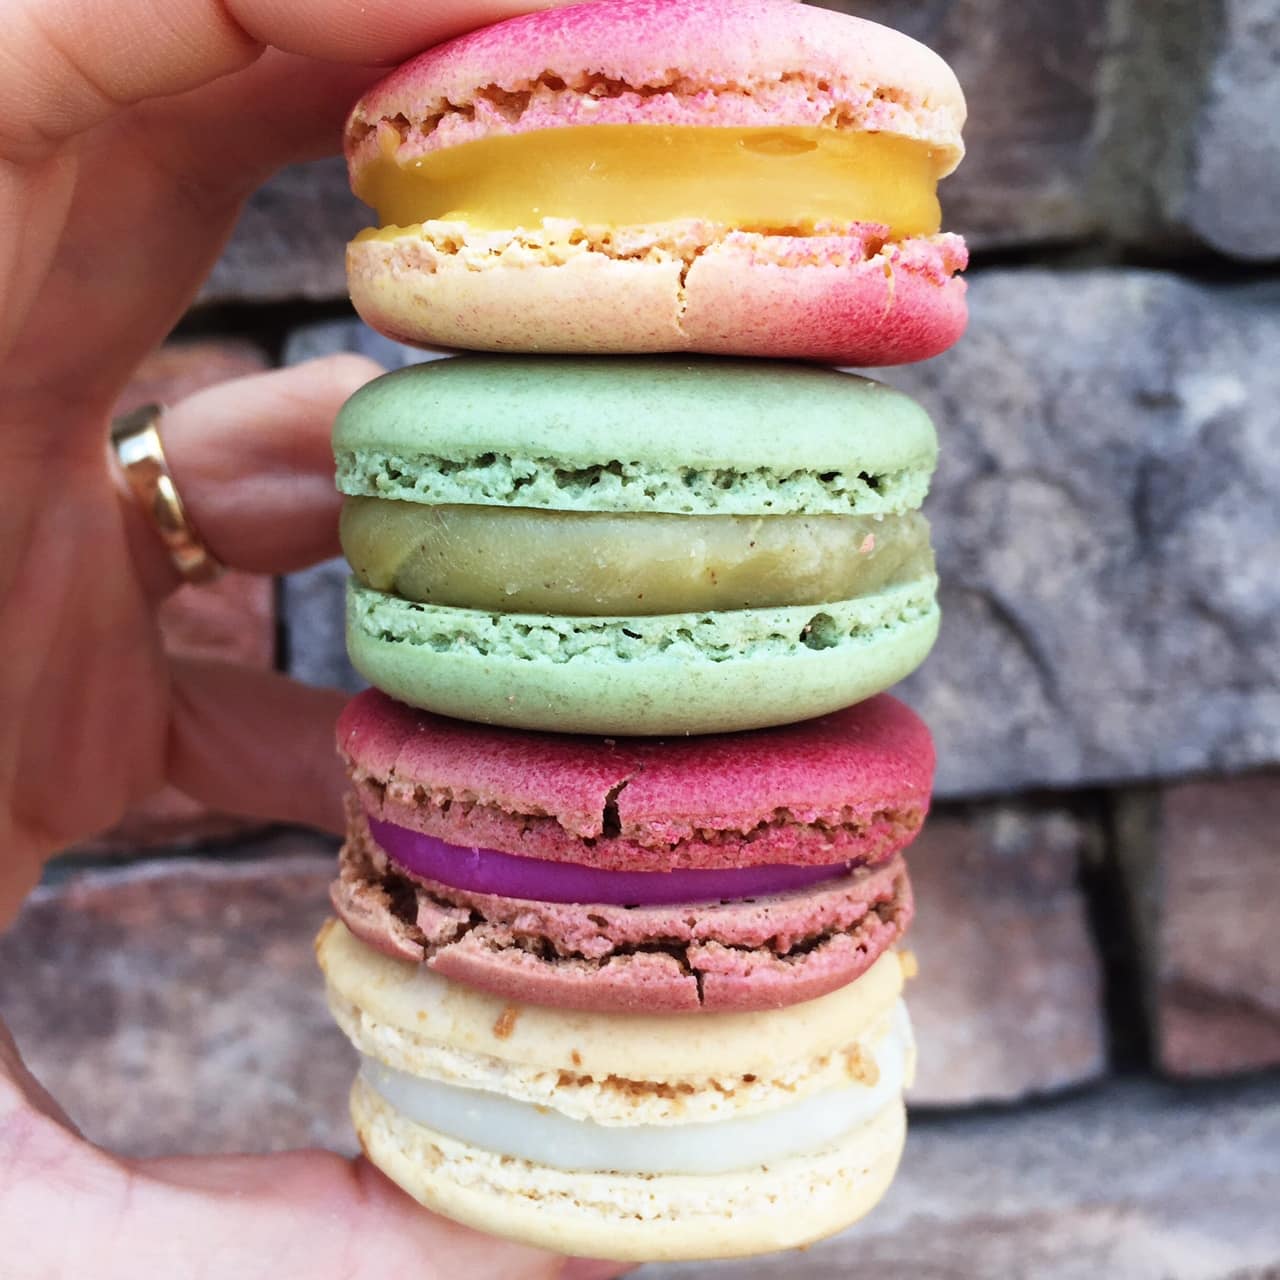 Whole Foods Bakery Macarons. Best Places to Eat in Arizona by Modern Honey. A list of all of the favorite and most popular restaurants to eat in Arizona. Tips on the best items to order. www.modernhoney.com